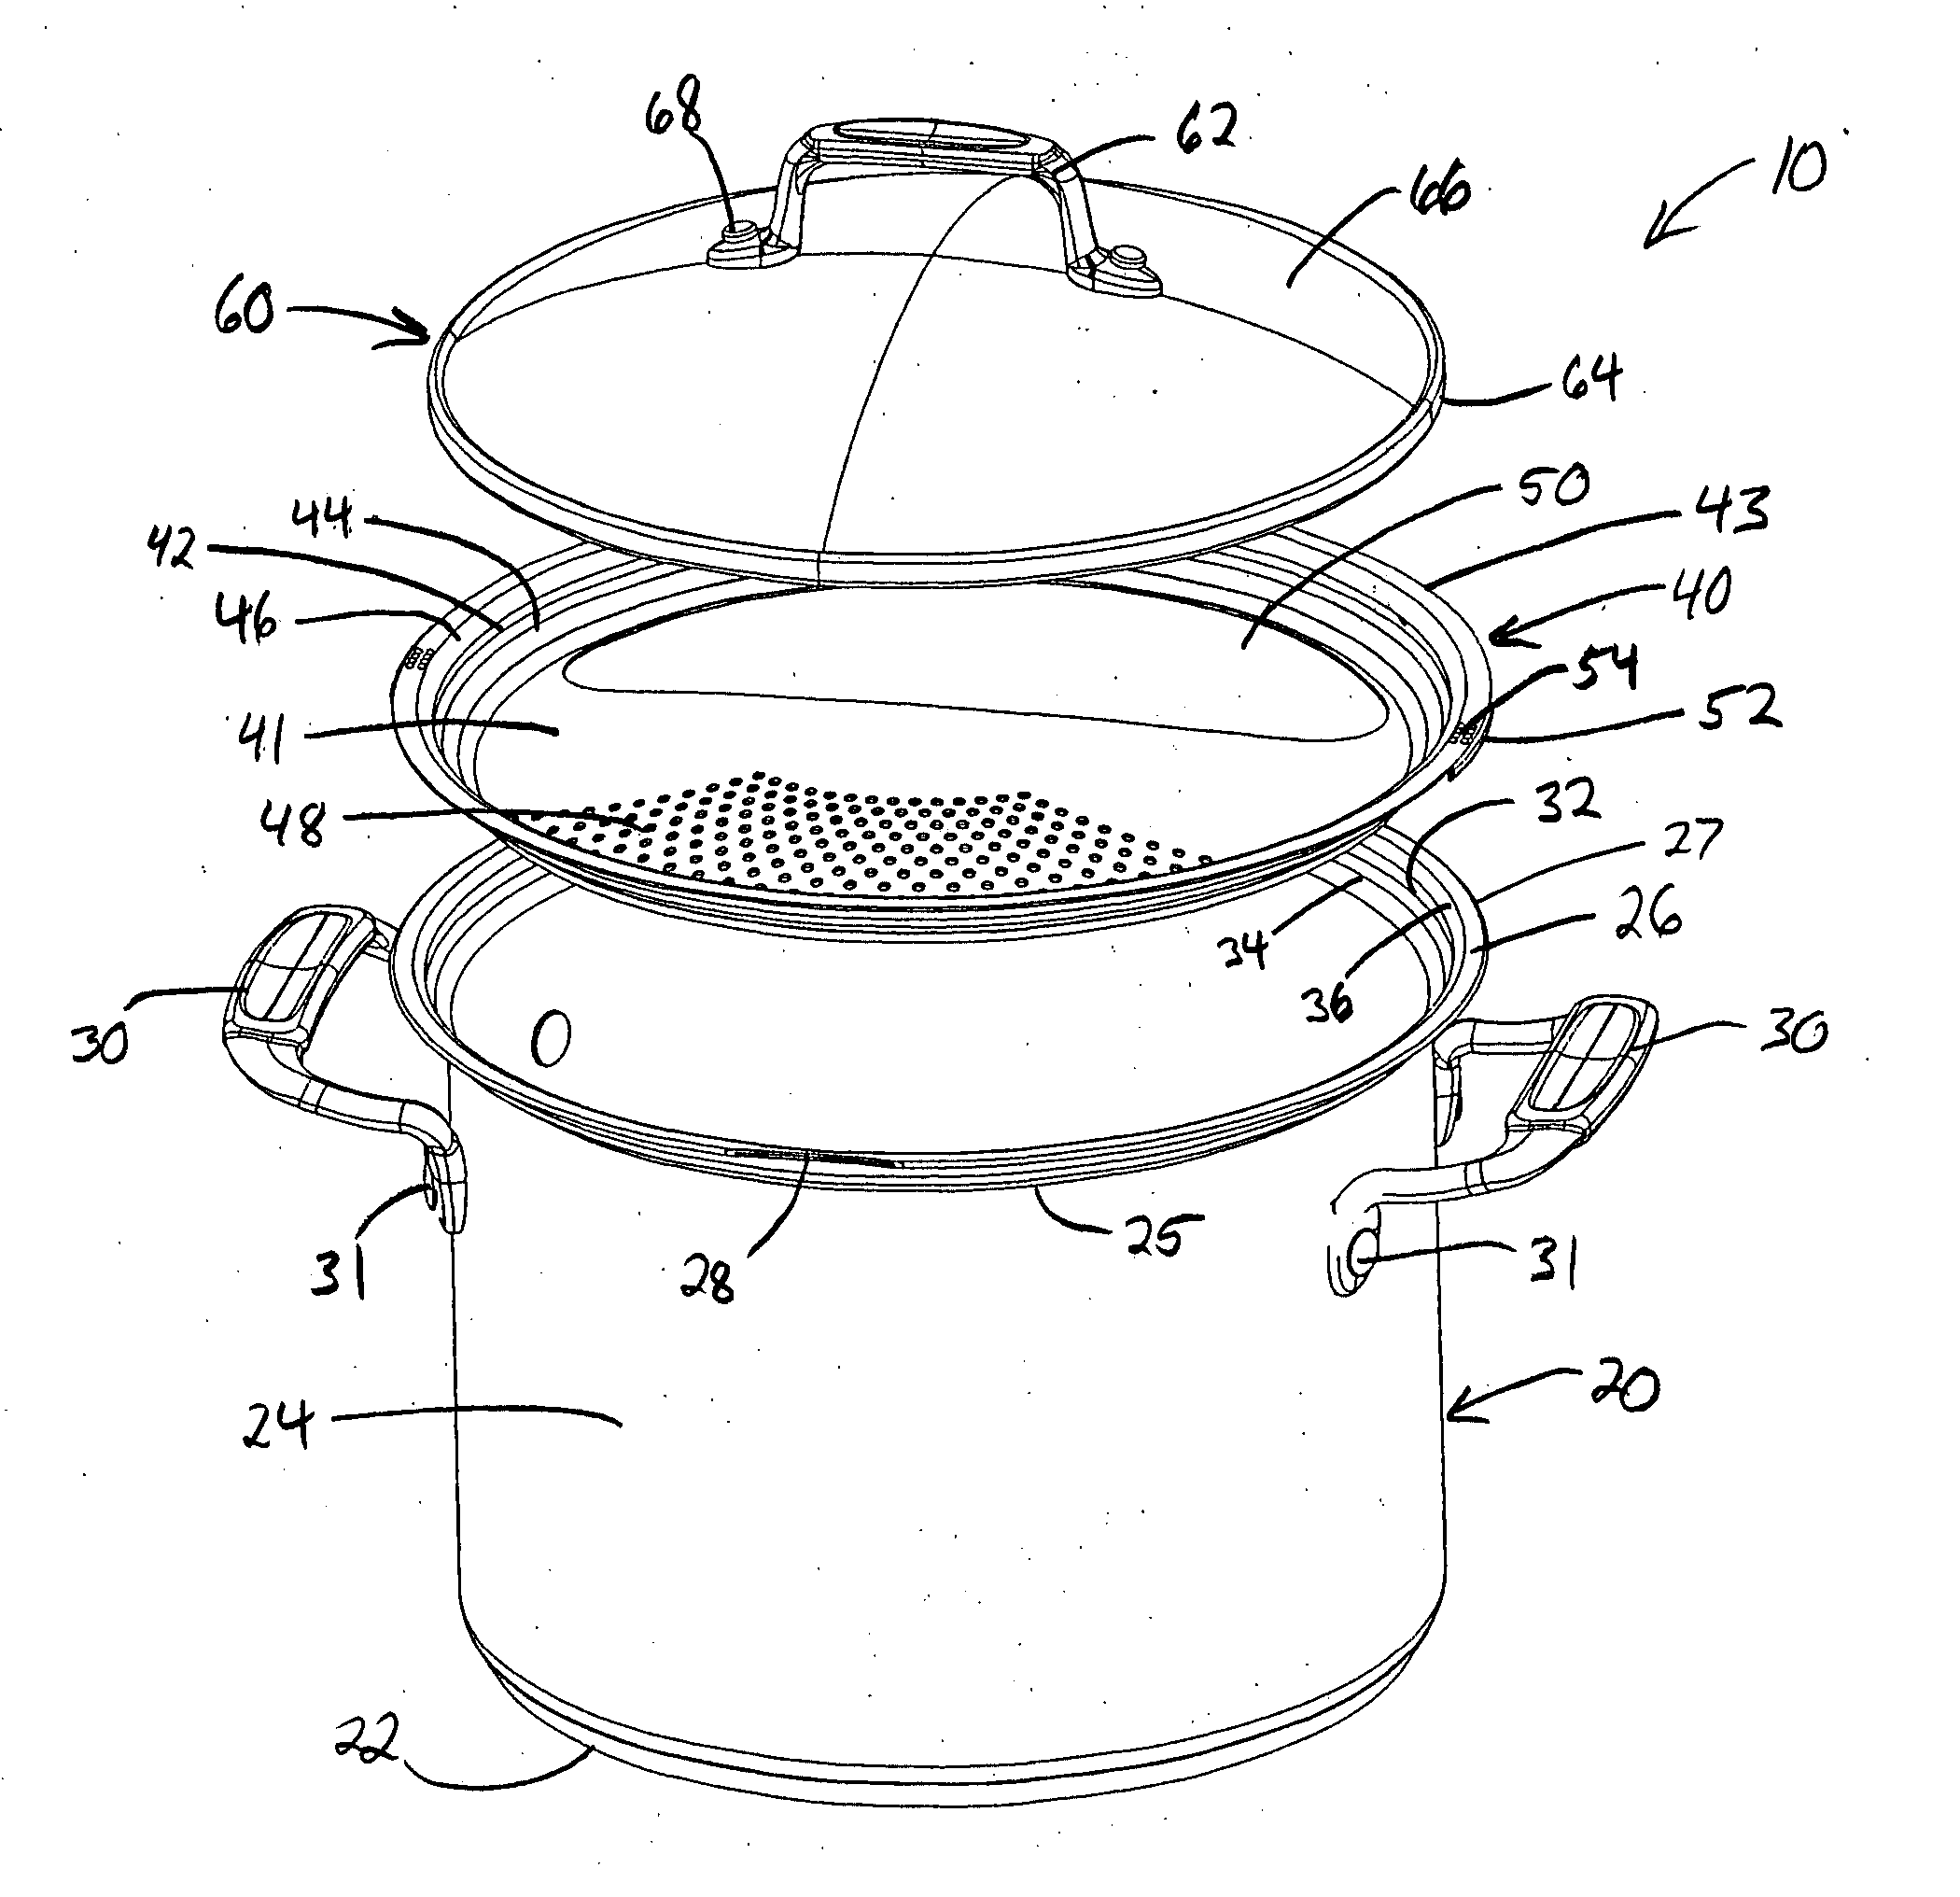 Lock and drain cooking system